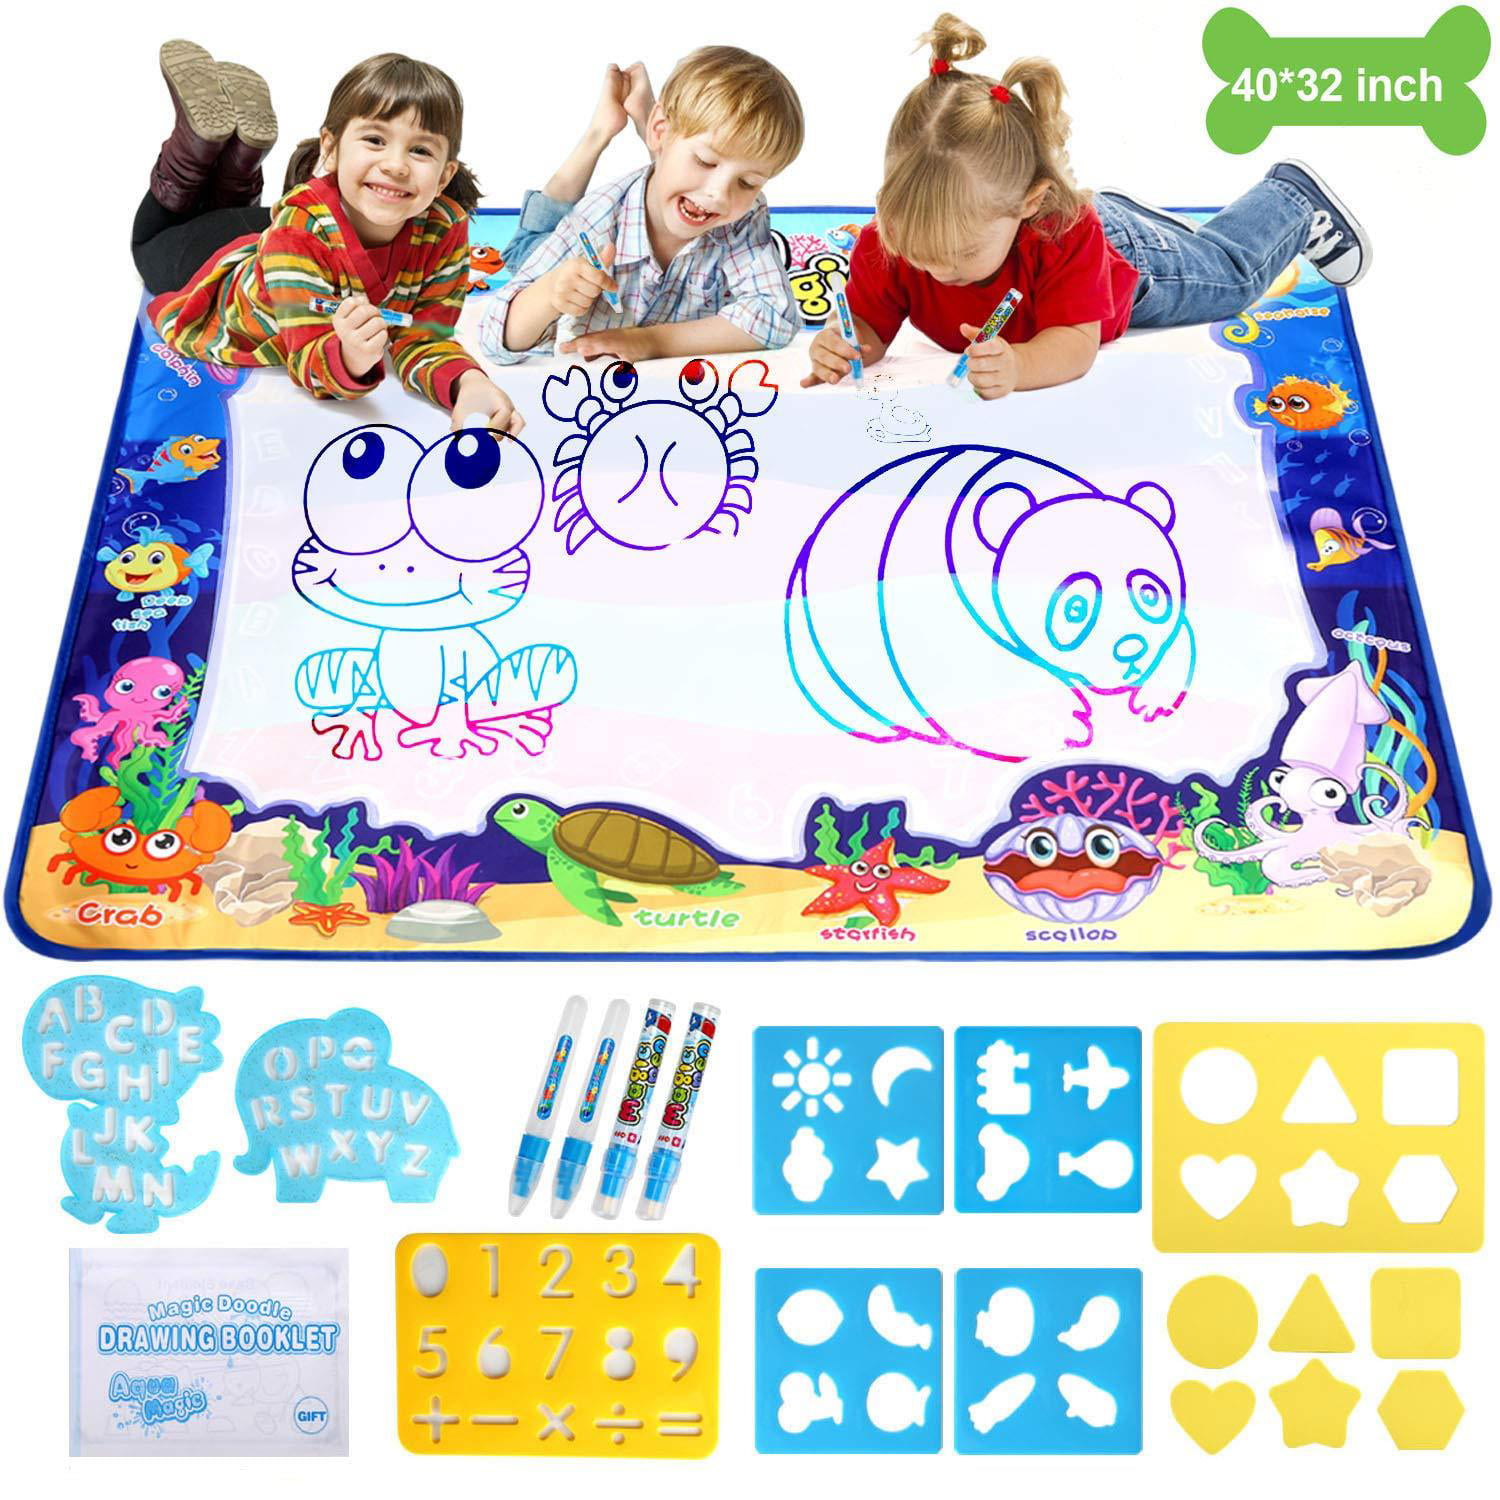 Magic Doodle Coloring Water Drawing Cards w/ Pen Kids Educational Toy Play Fun 